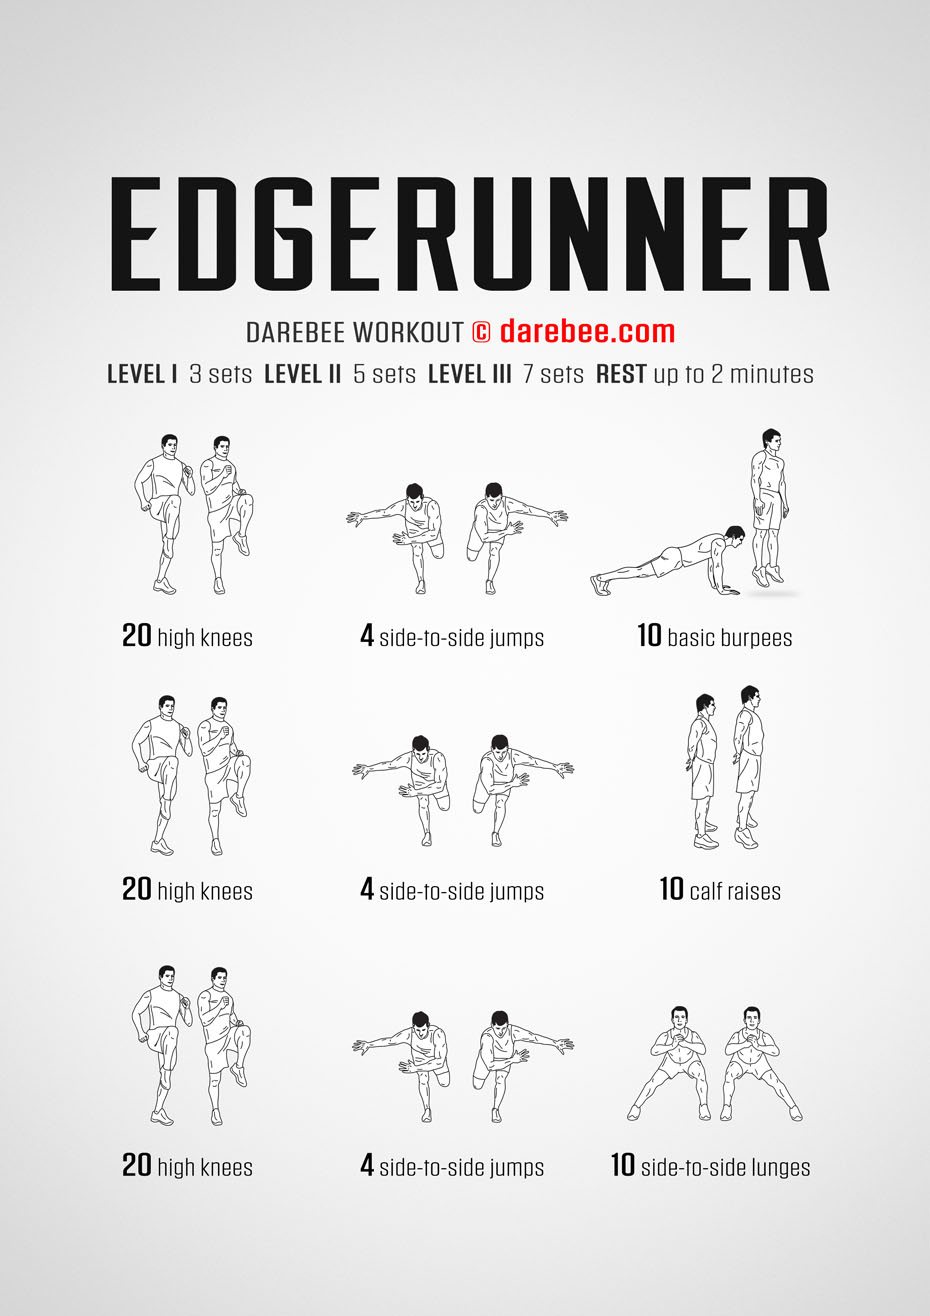 Edgerunner is a Darebee no-equipment cardiovascular workout that works your lower body hard.